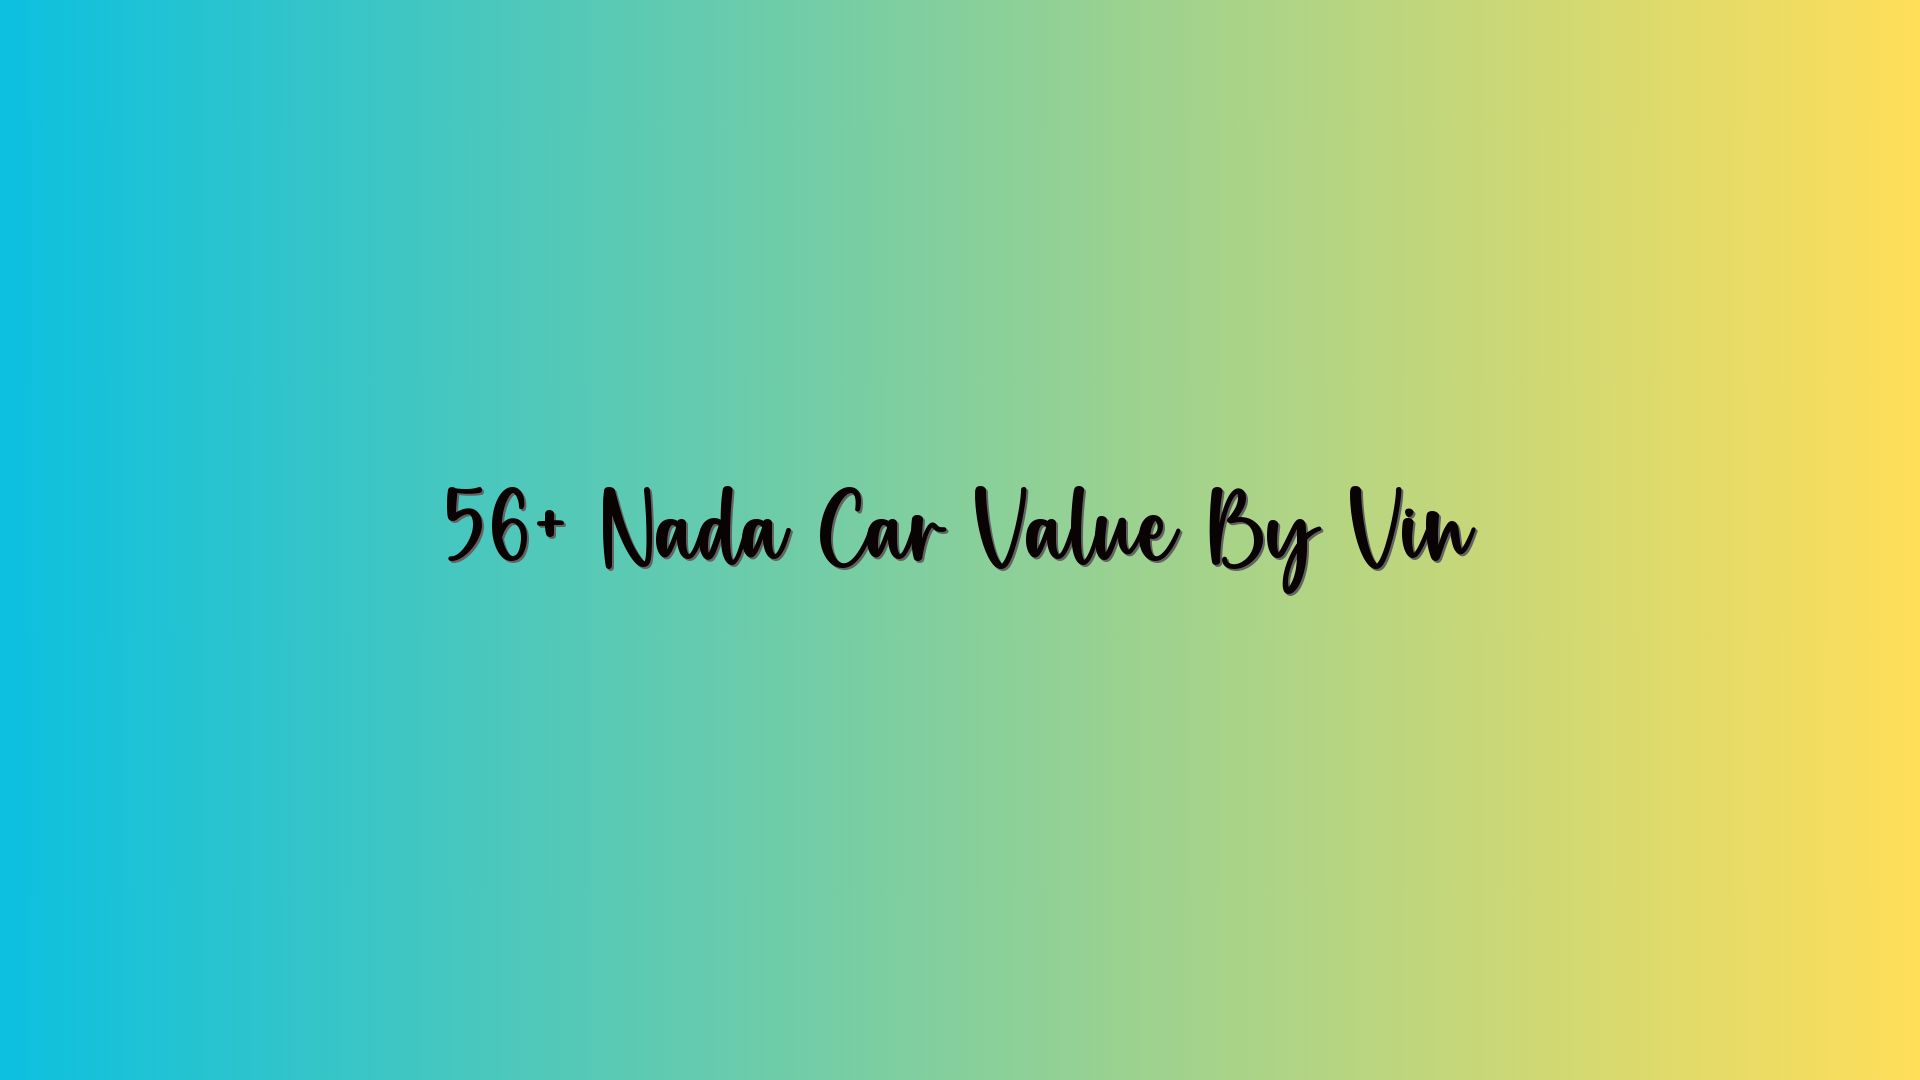 56+ Nada Car Value By Vin